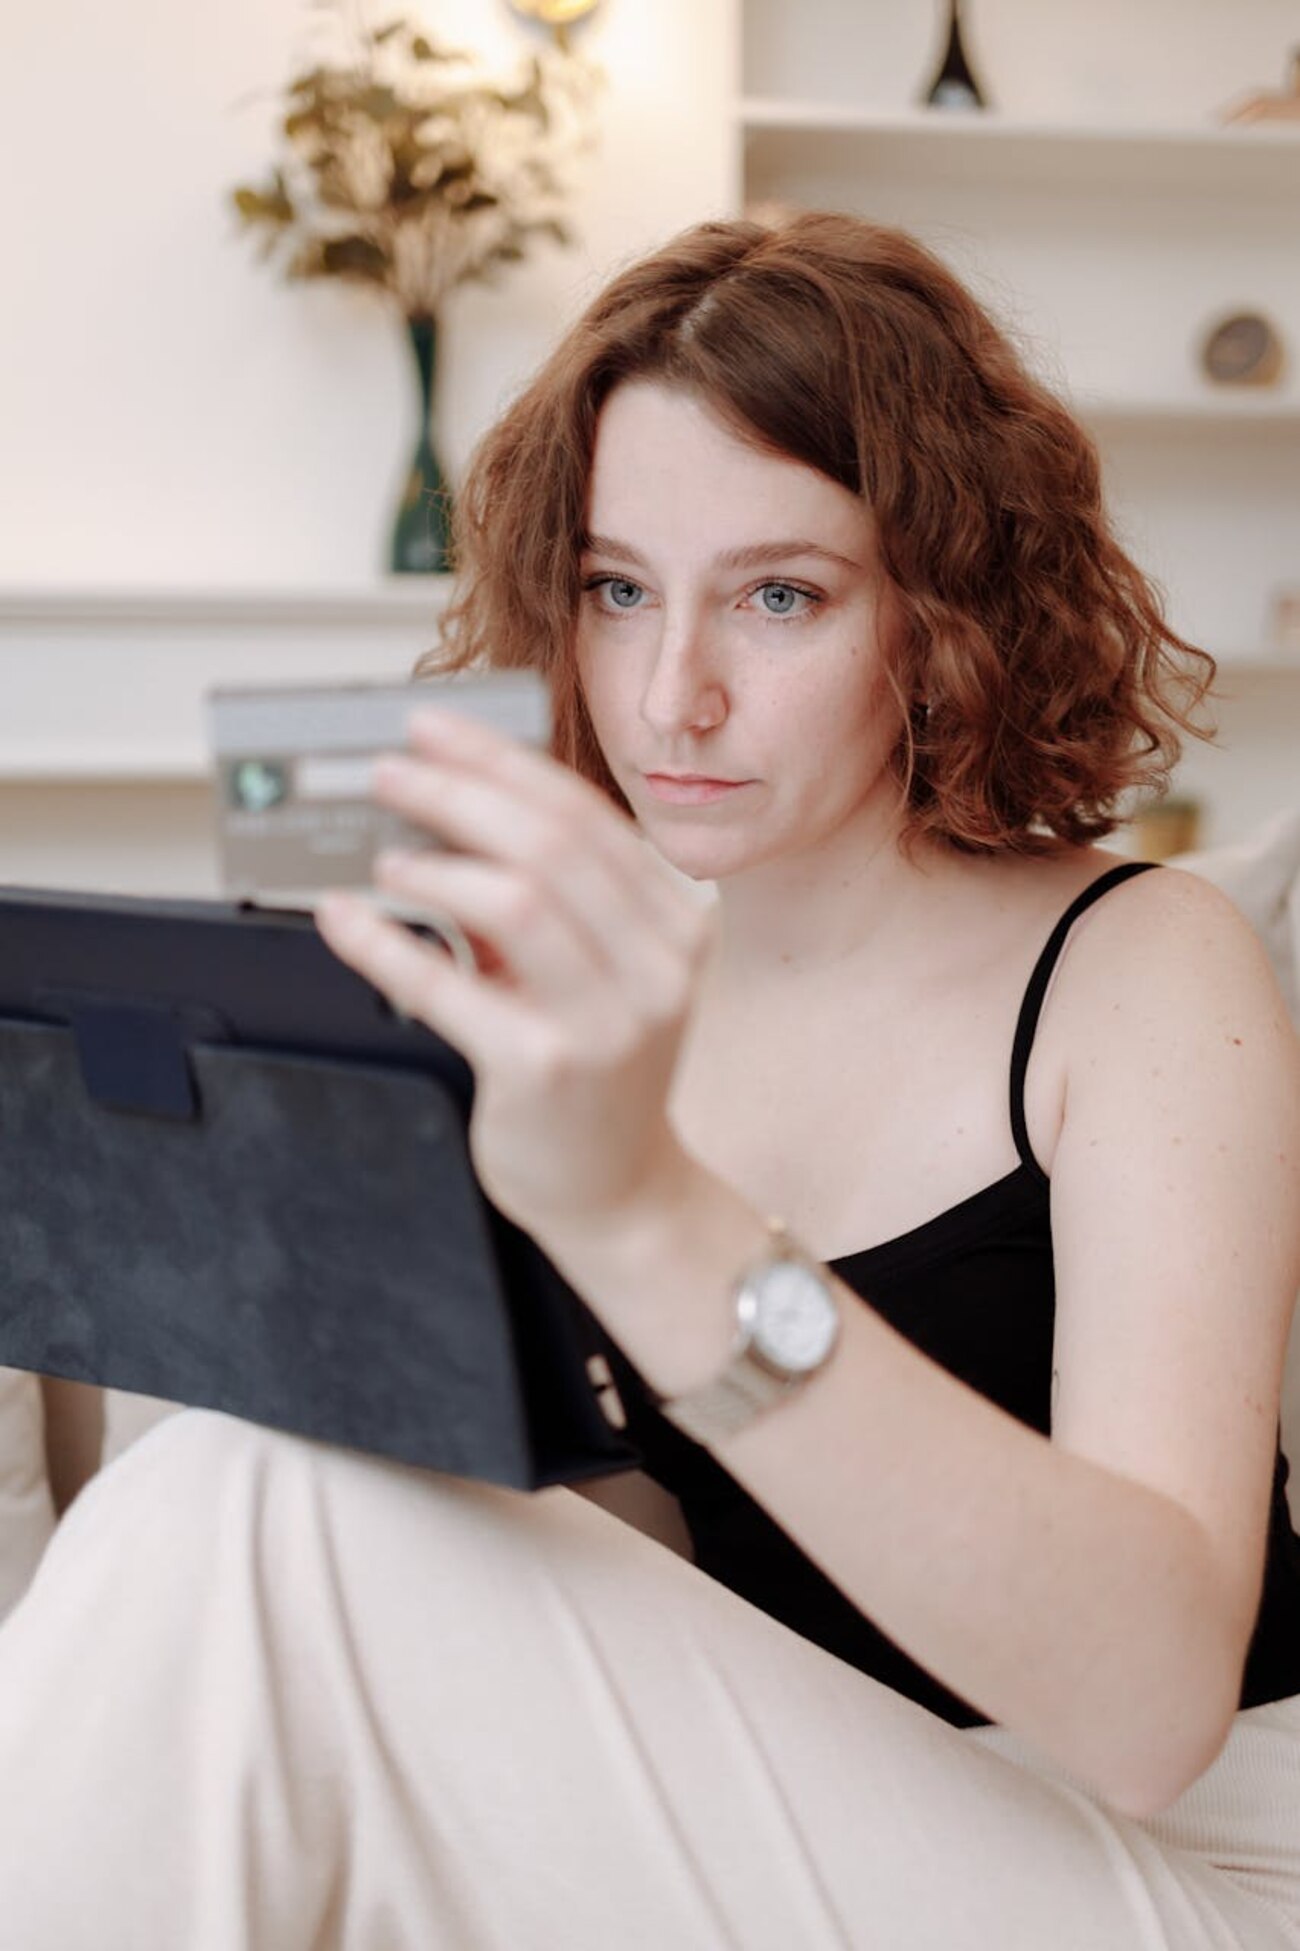 A woman sitting on a couch, holding a credit card while using a tablet